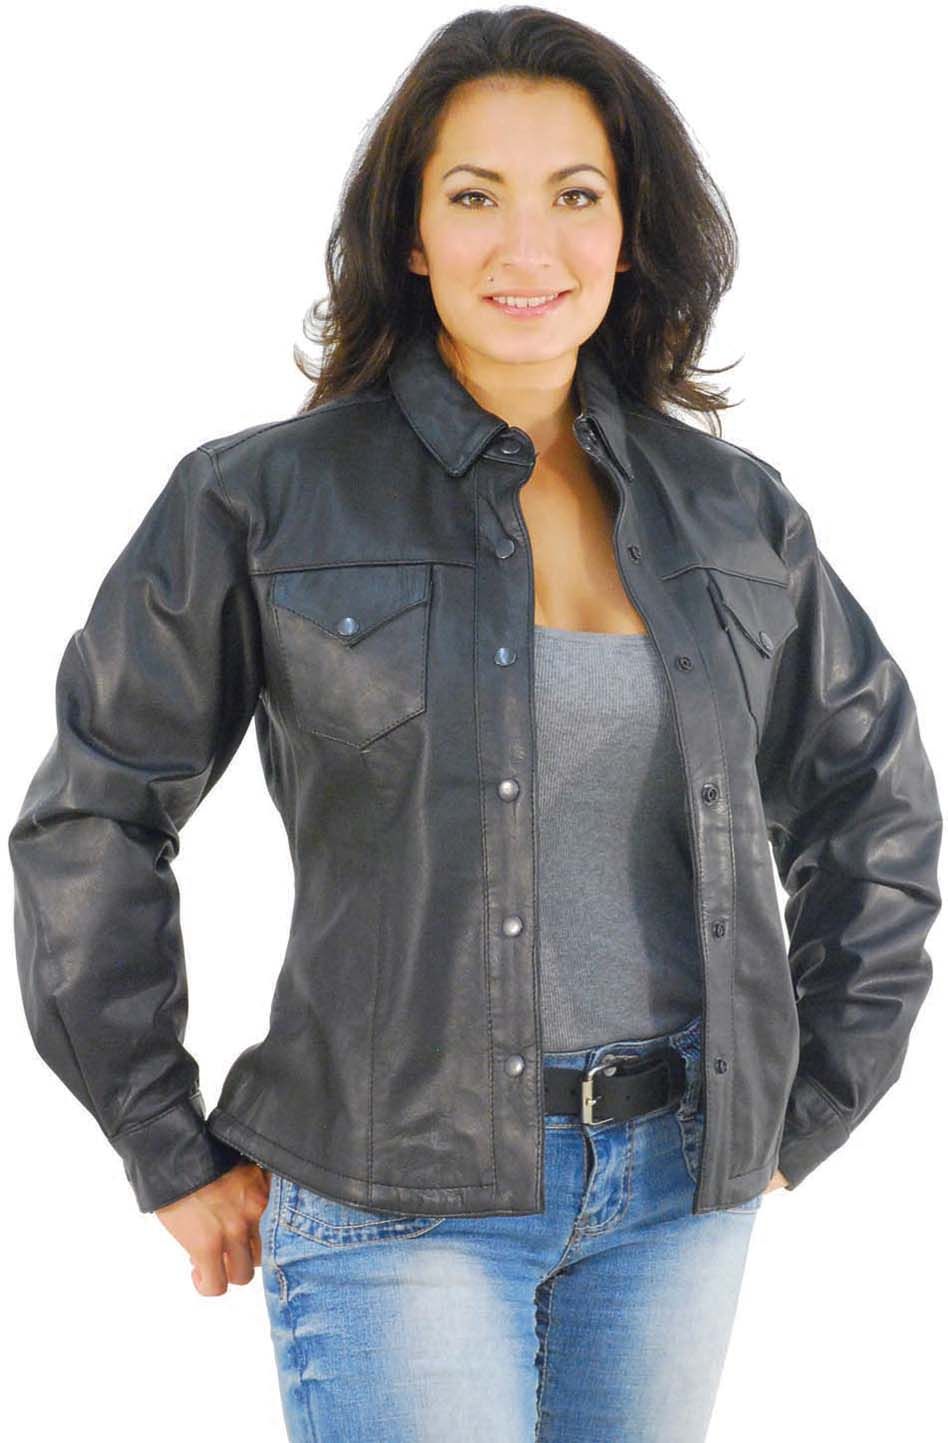 lady rider wearing a lightweight leather jacket